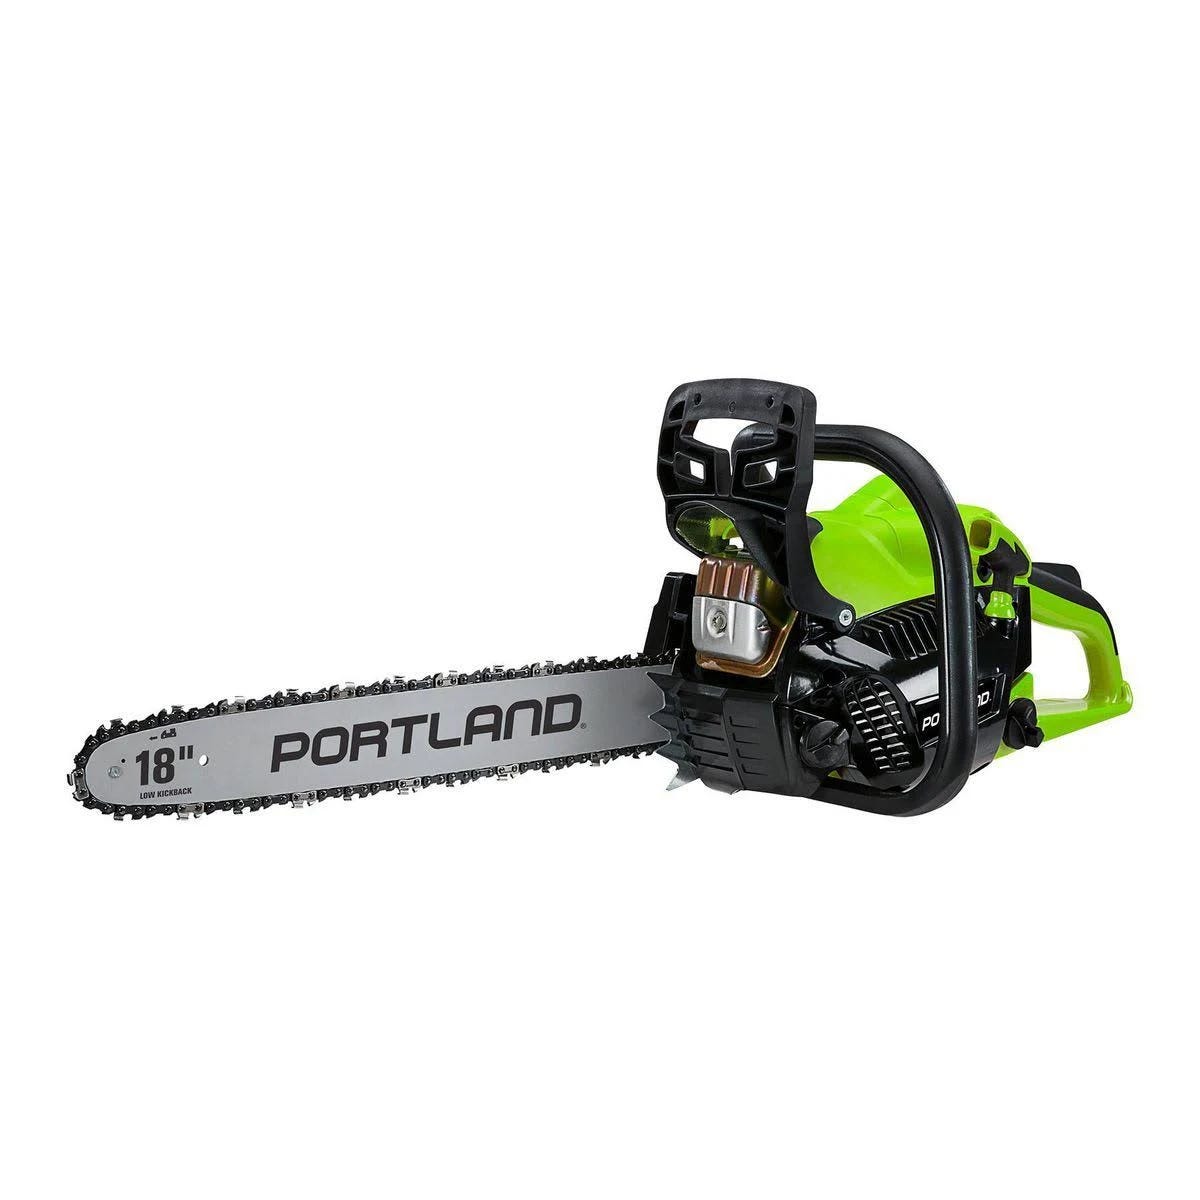 Portland Gas-Powered Chainsaw for Efficient Trimming | Image